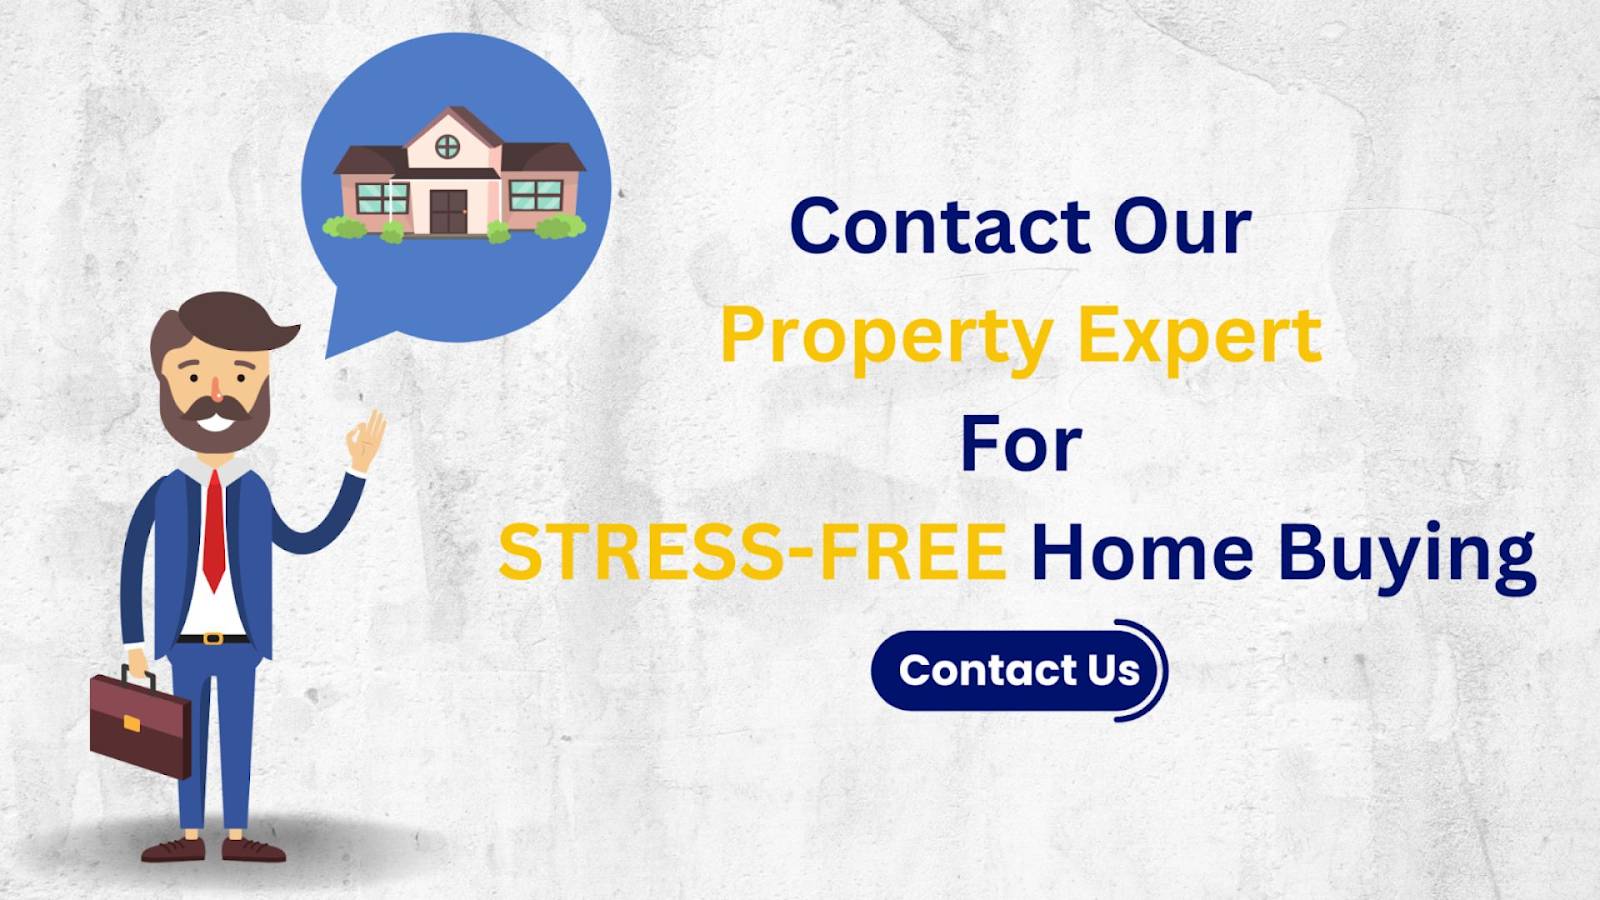 Contact a property expert at PropertyCloud for stress-free and easy home-buying